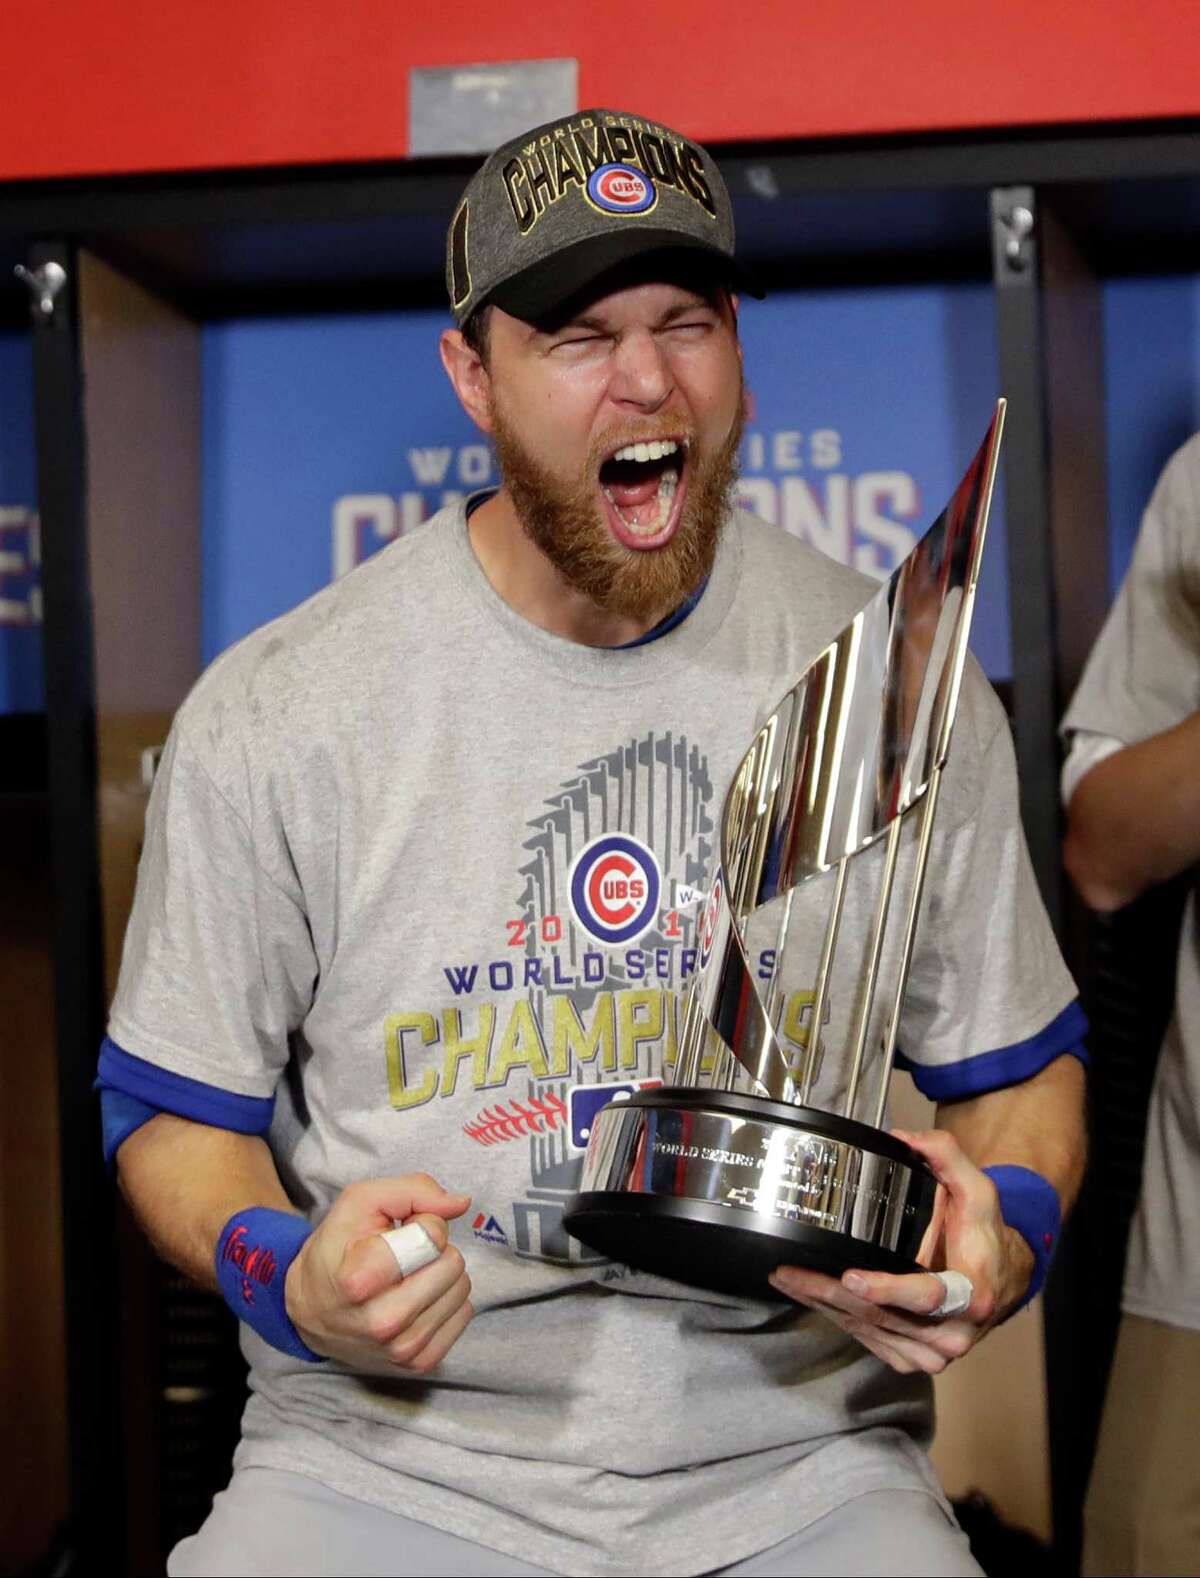 Cubs will start World Series Trophy tour on Friday